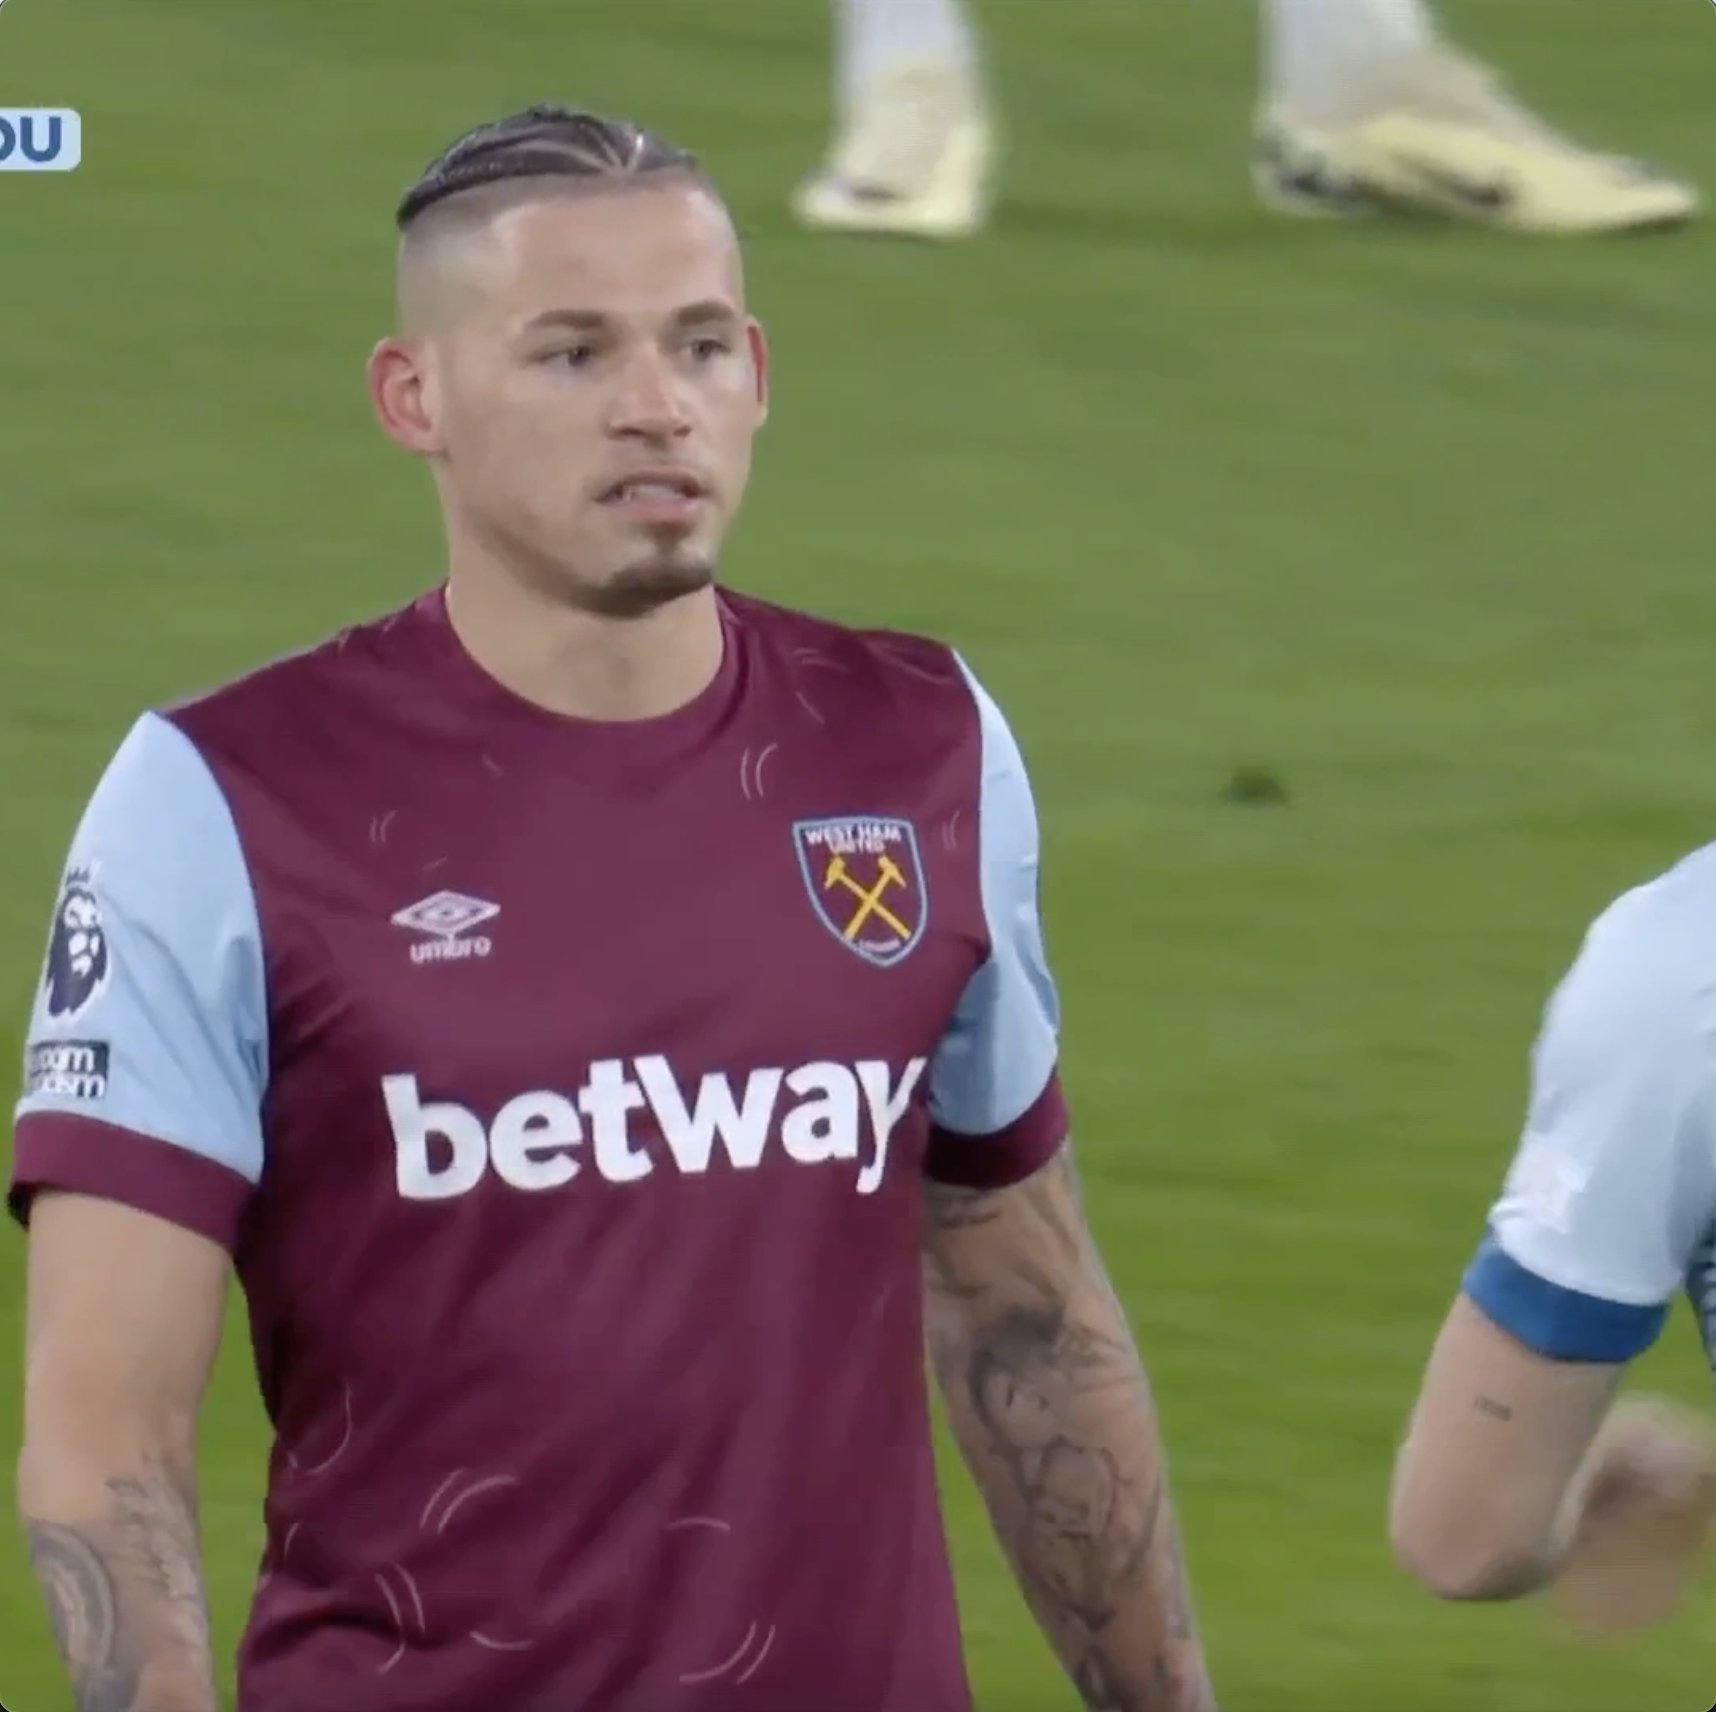 Disaster for West Ham. 😳Kalvin Phillips' debut for the Irons is off to a rough start as he gives away possession in his own box, allowing Dominic Solanke to pounce!